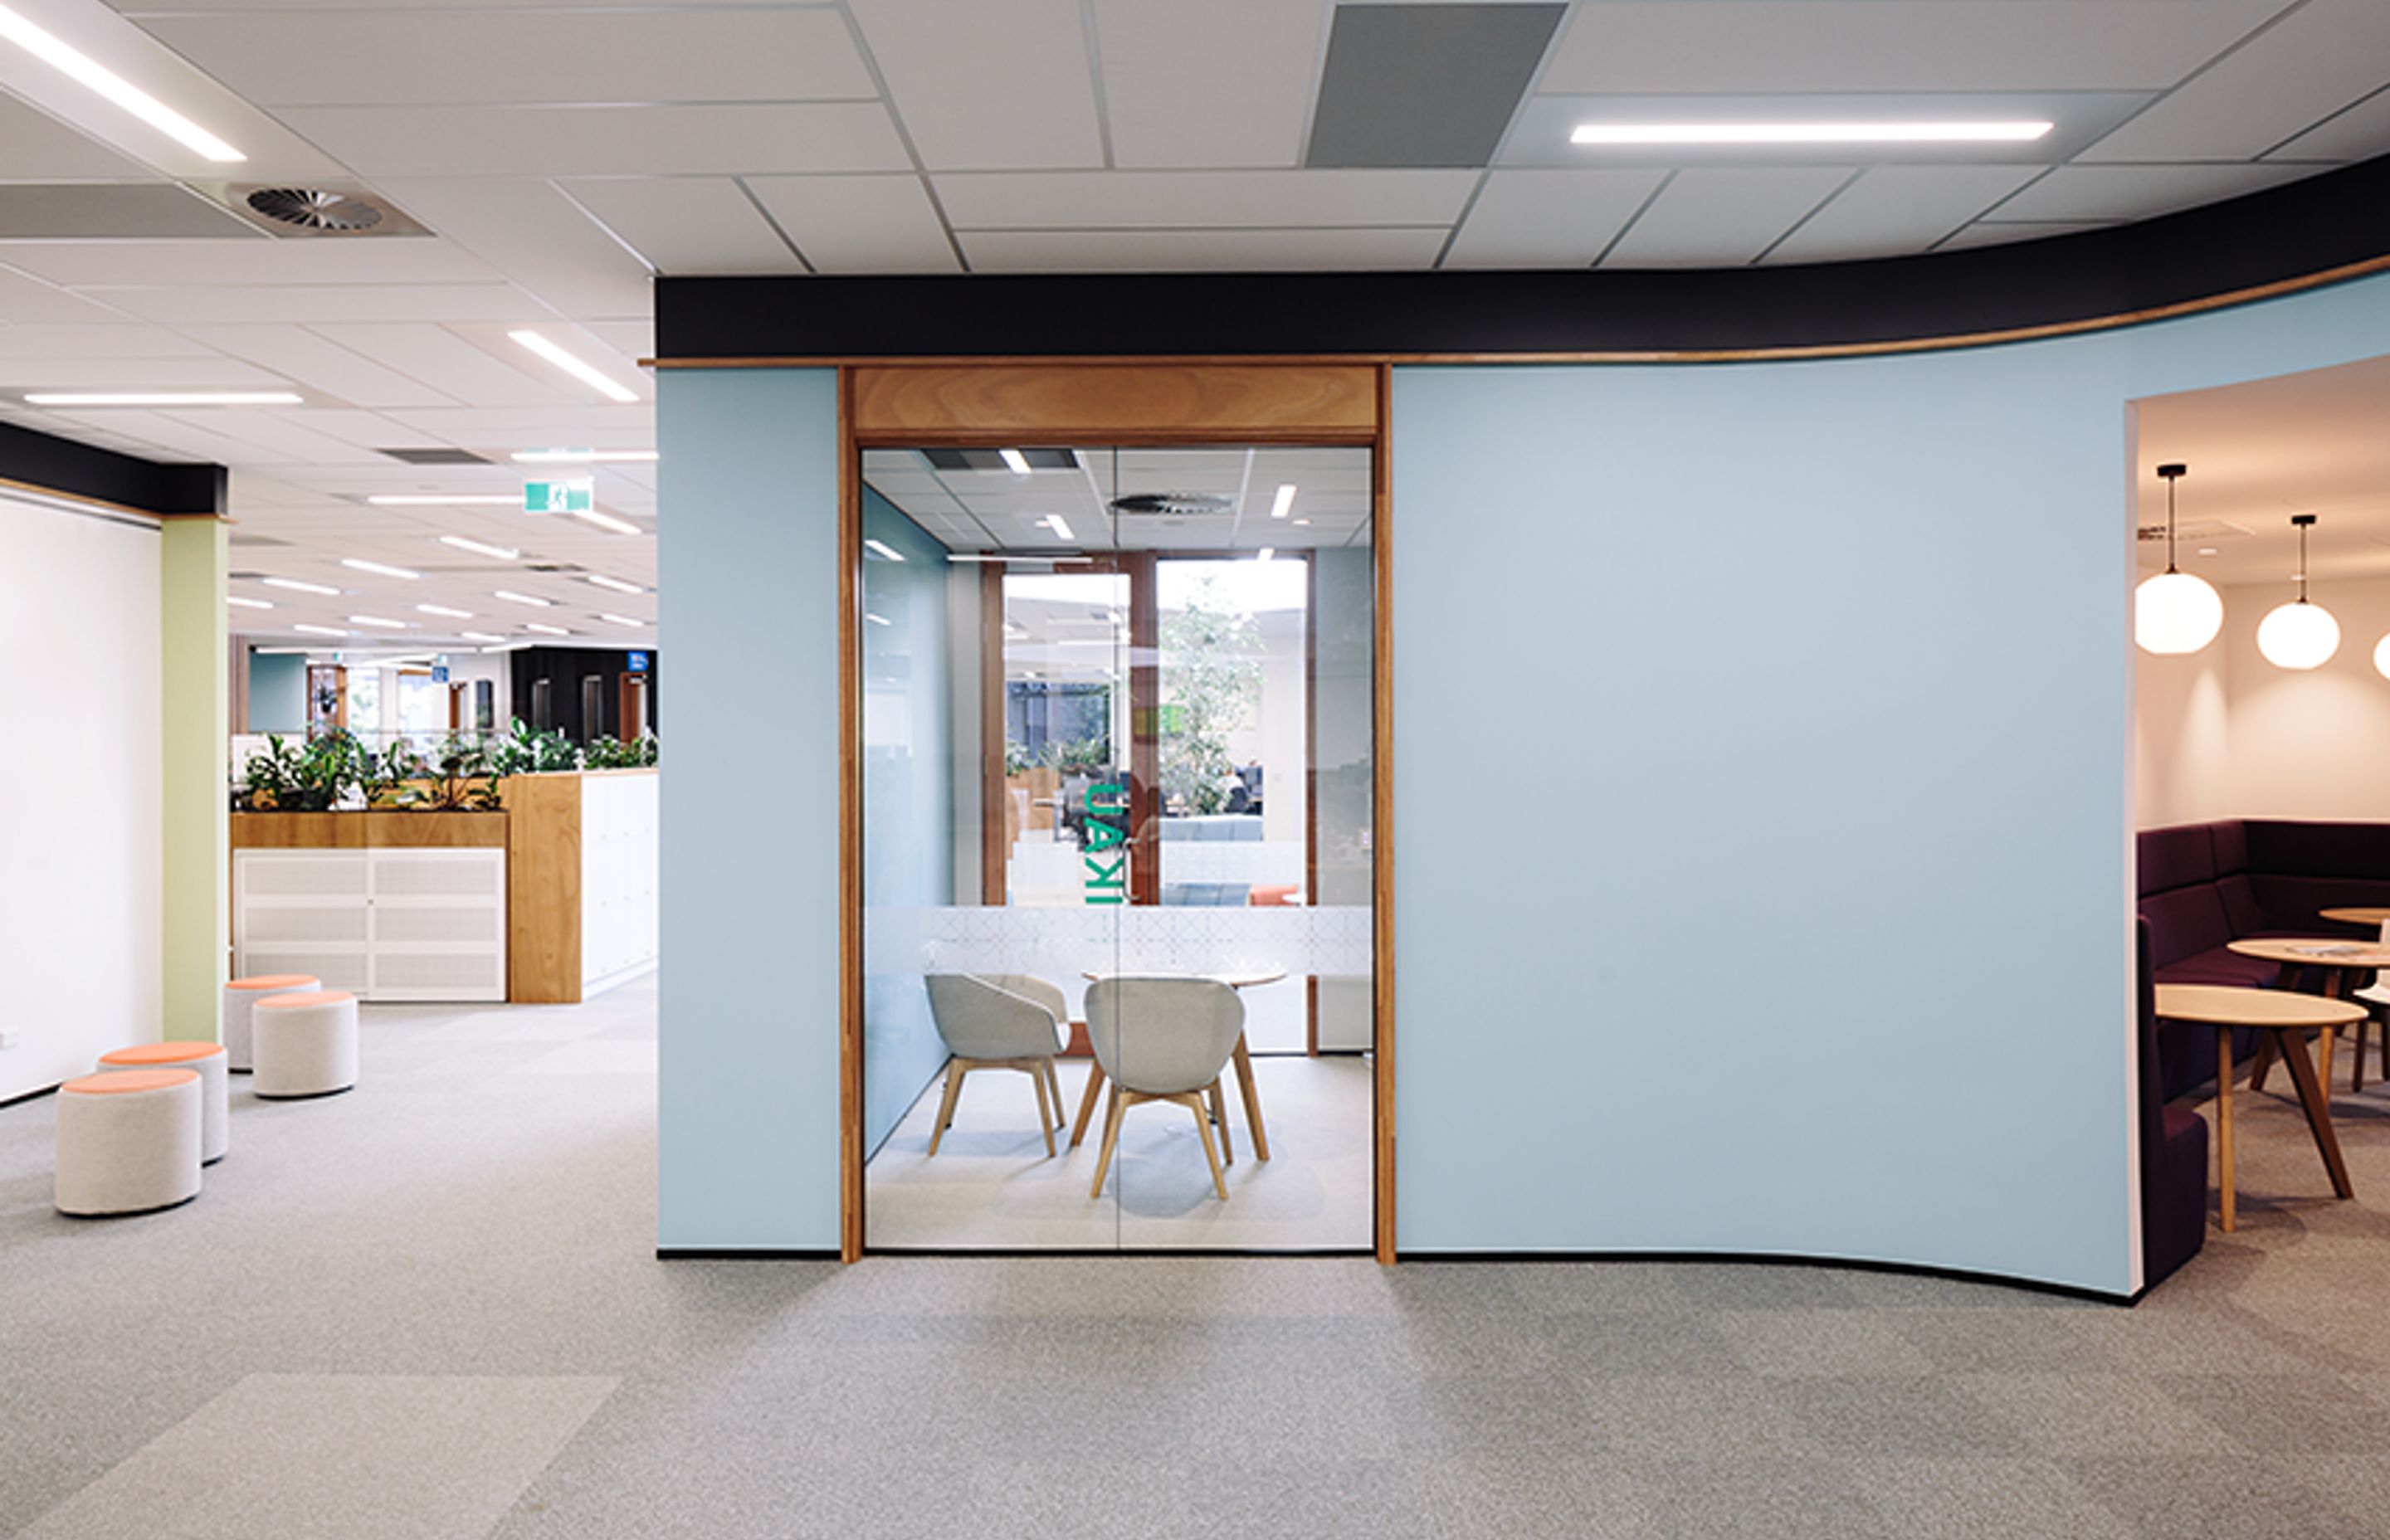 Curved meeting rooms, at the core of each floor plate, create nooks and niches for alternative working spaces, providing meeting places and opportunities for project team collaboration, enhanced through the provision of movable project panels.